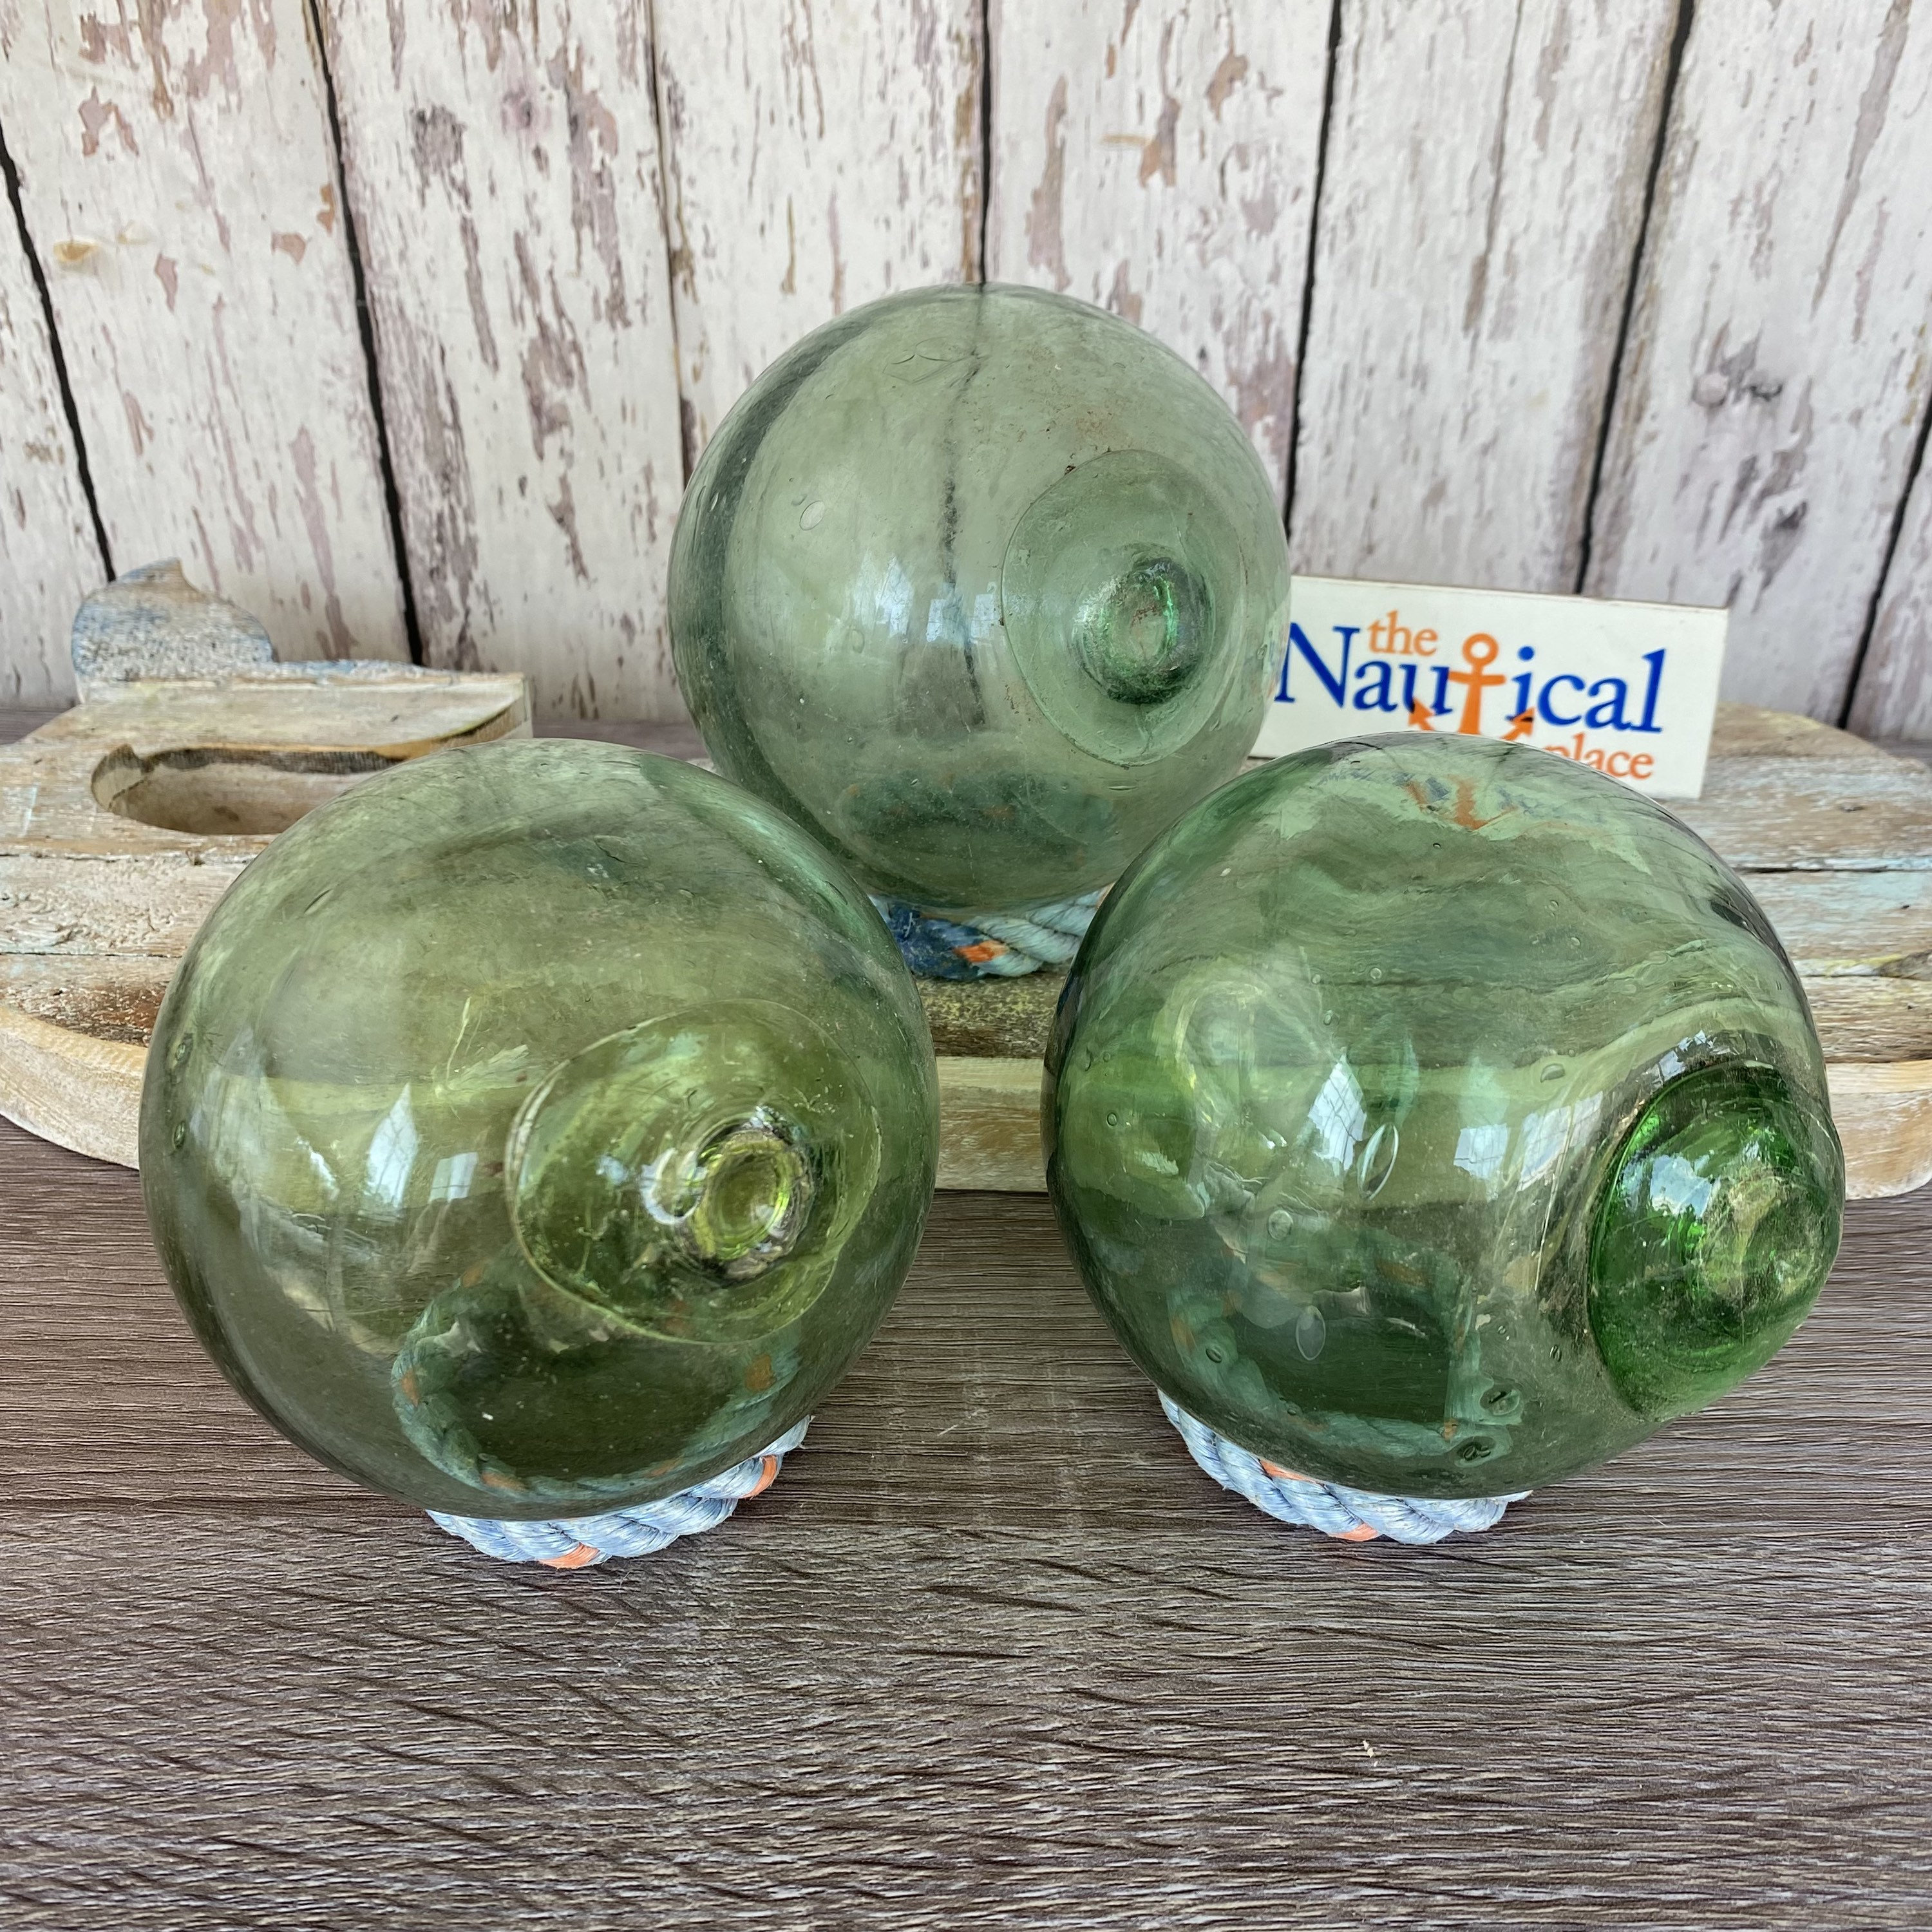 Japanese Glass Fishing Floats, 4 Softball Size, Authentic Glass Buoy From  Japan, Once Used by Fisherman on Nets Single or Set of 3 